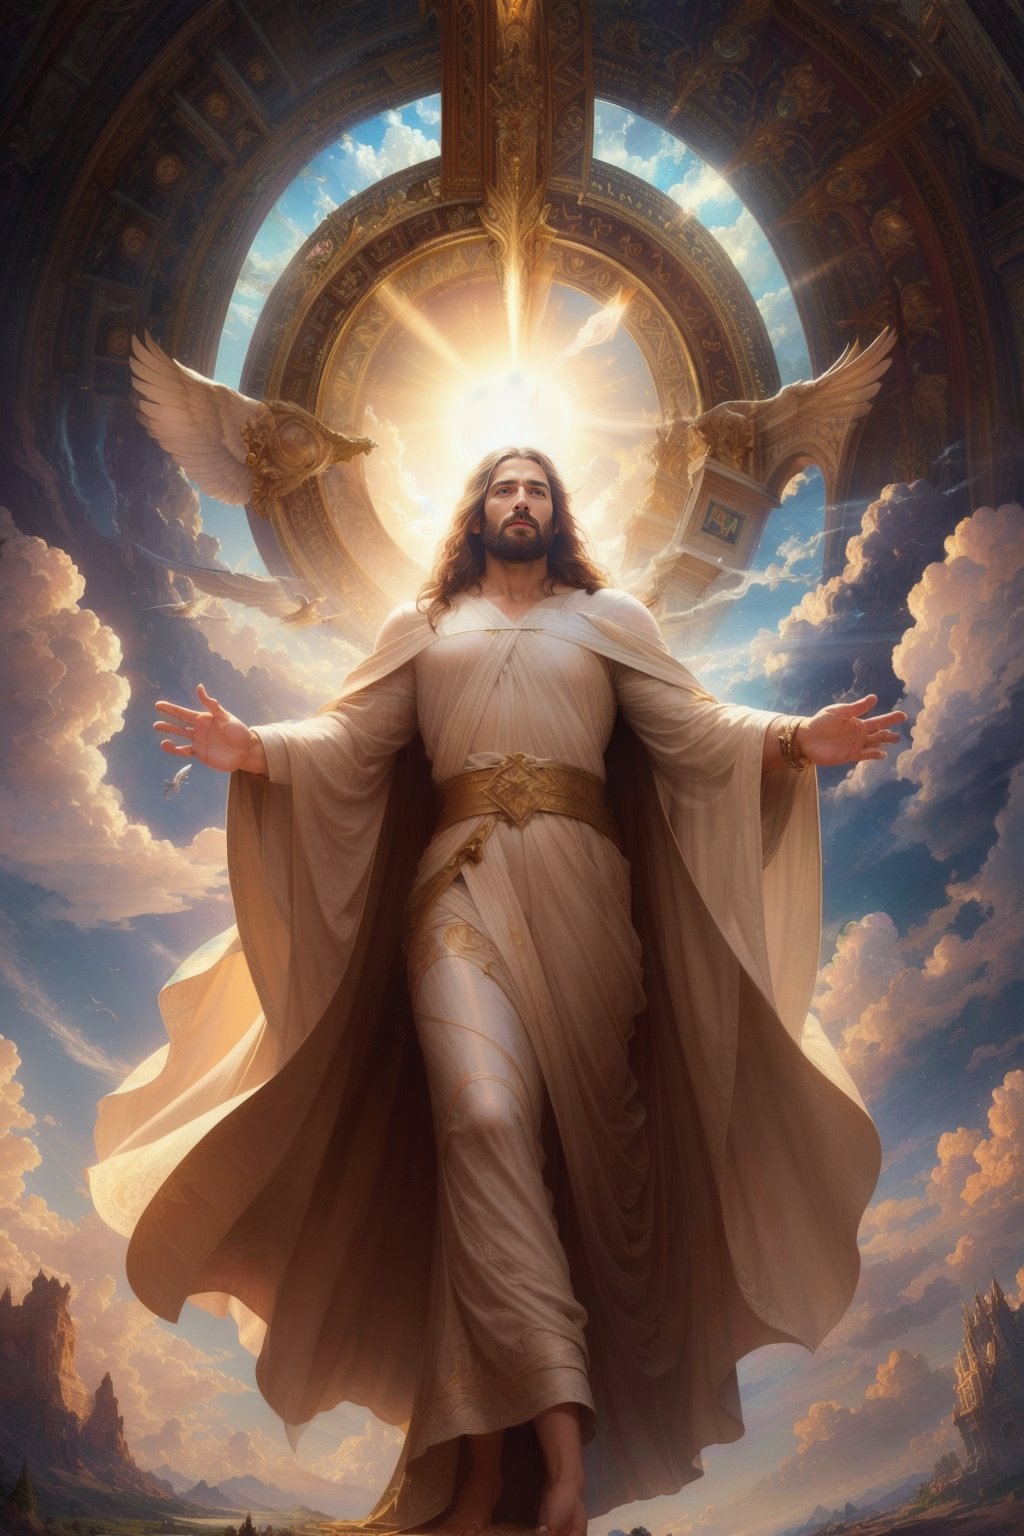 A Divine Jesus Painting with Angelic and Heavenly Elements